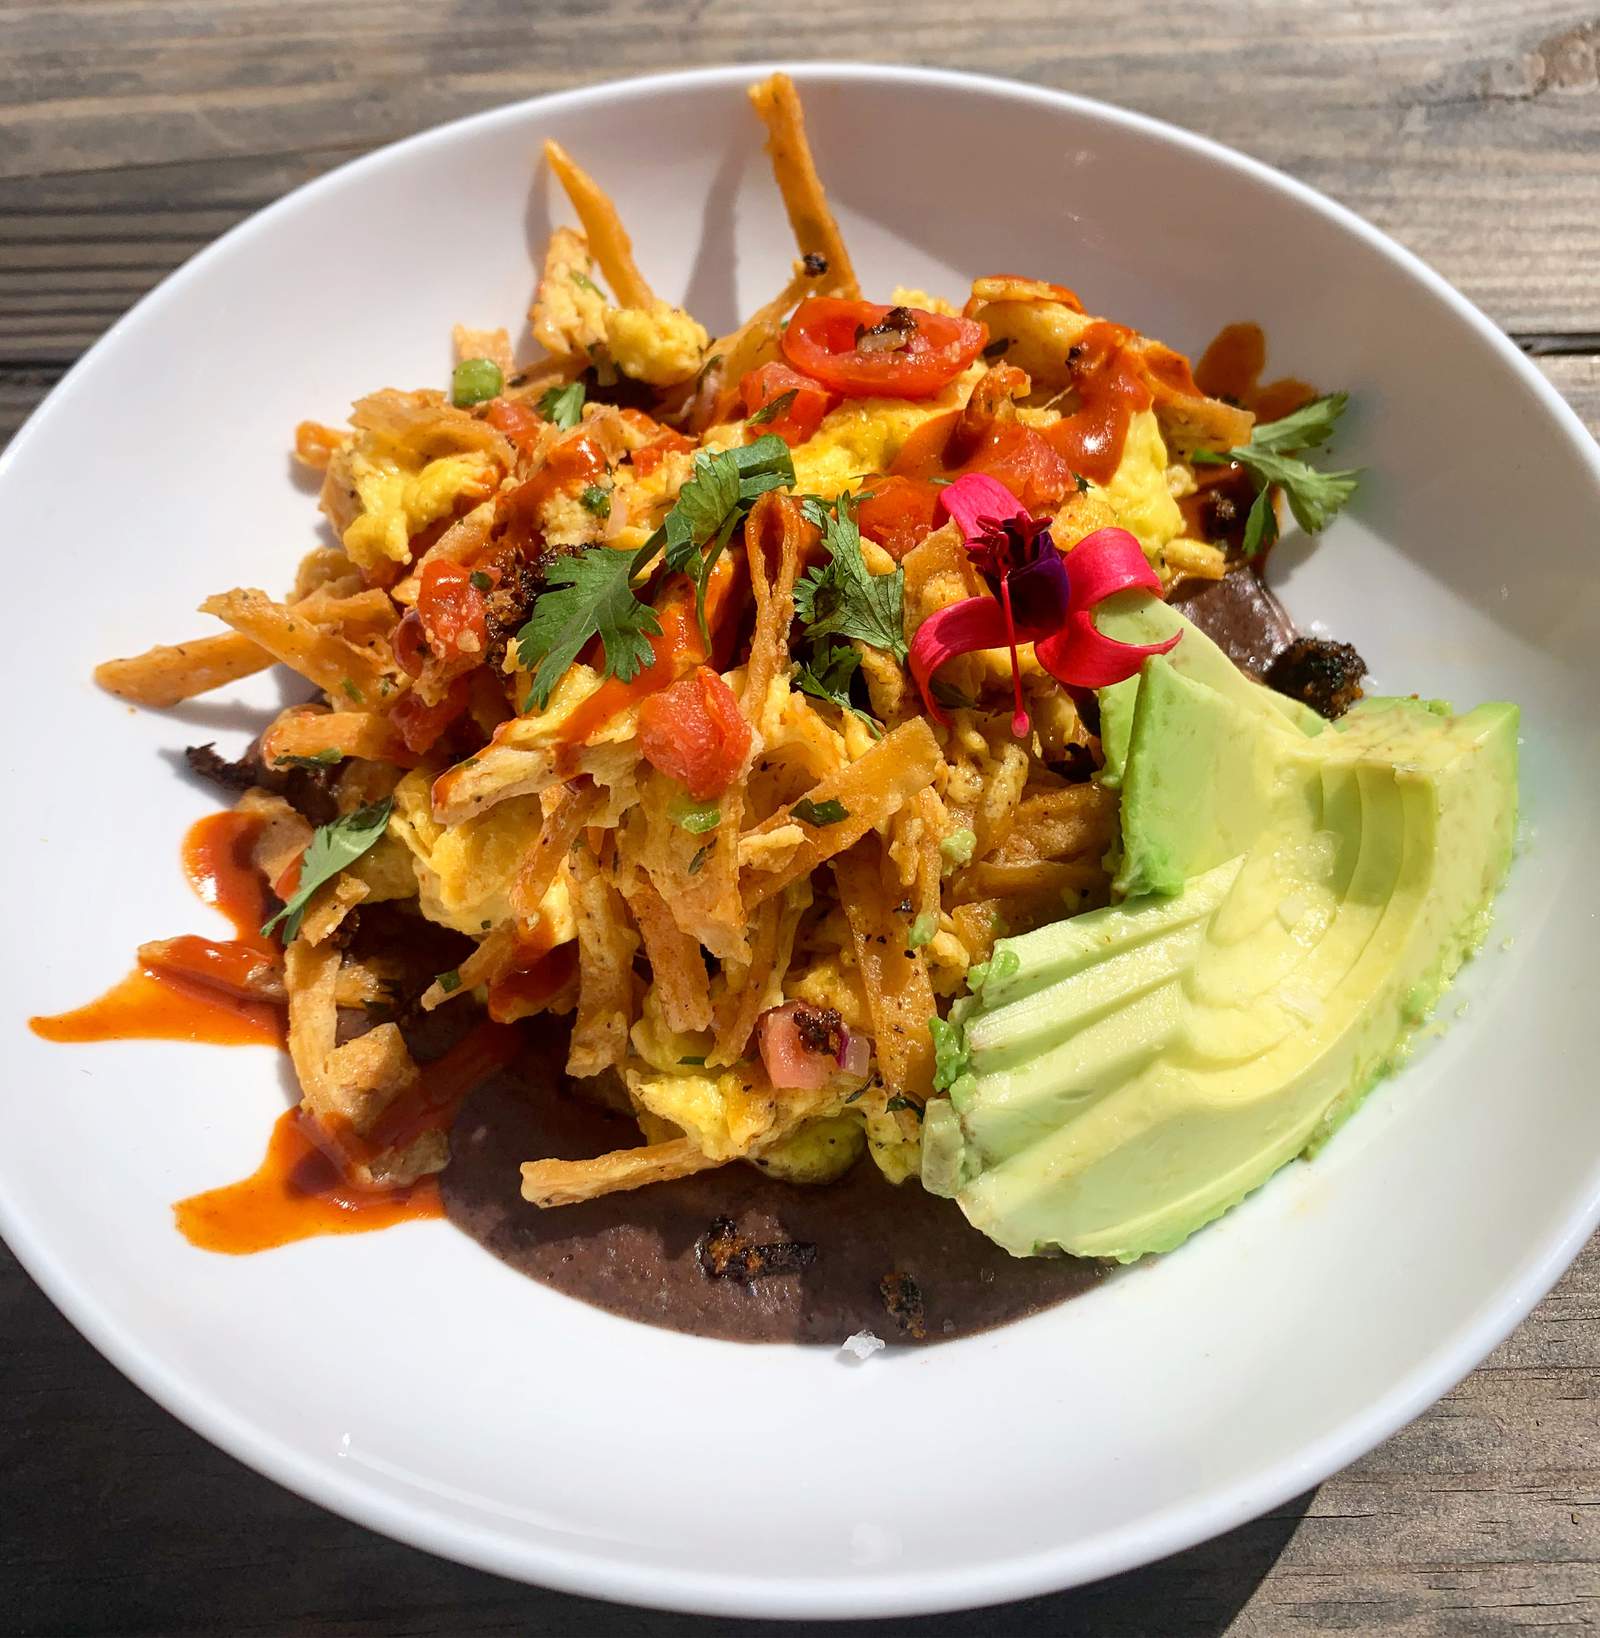 Houston vegan chef shares how to make plant-based migas in 3 easy steps